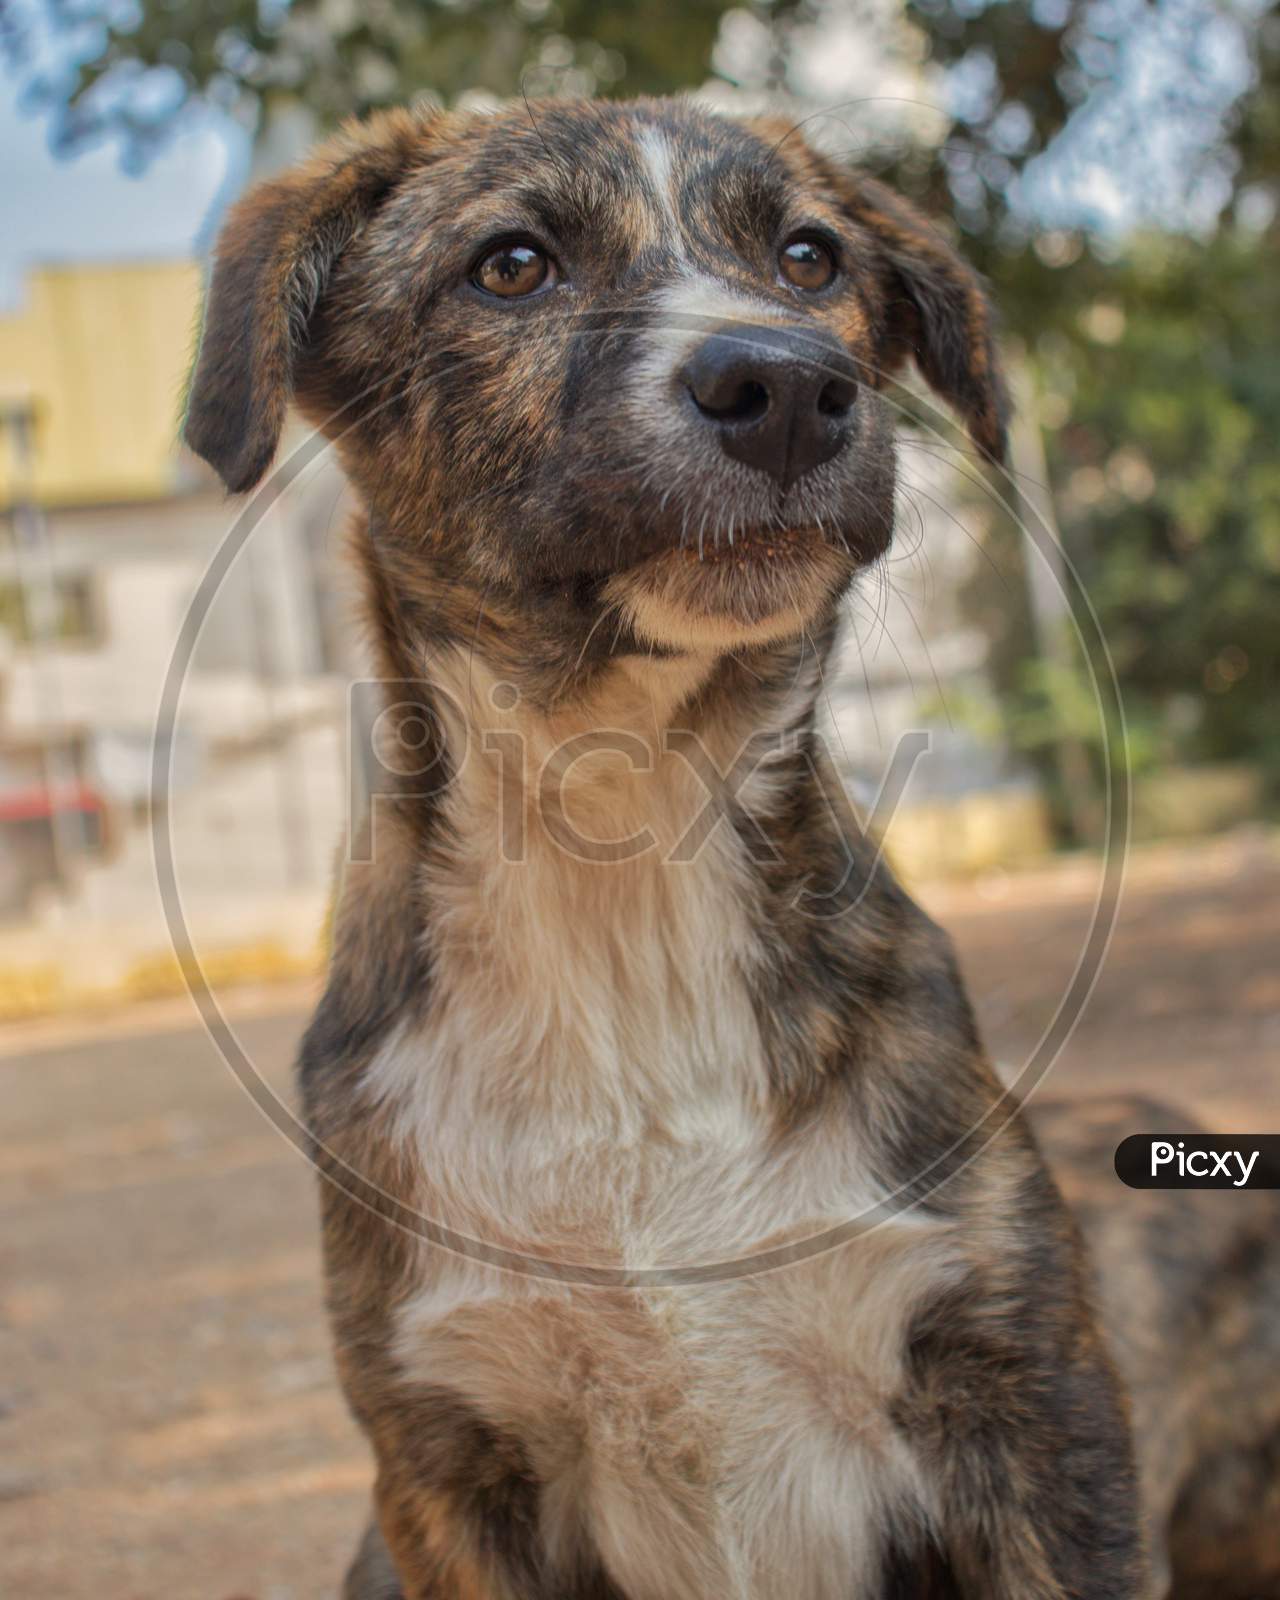 A Street Dog With an Innocent  Face Expression